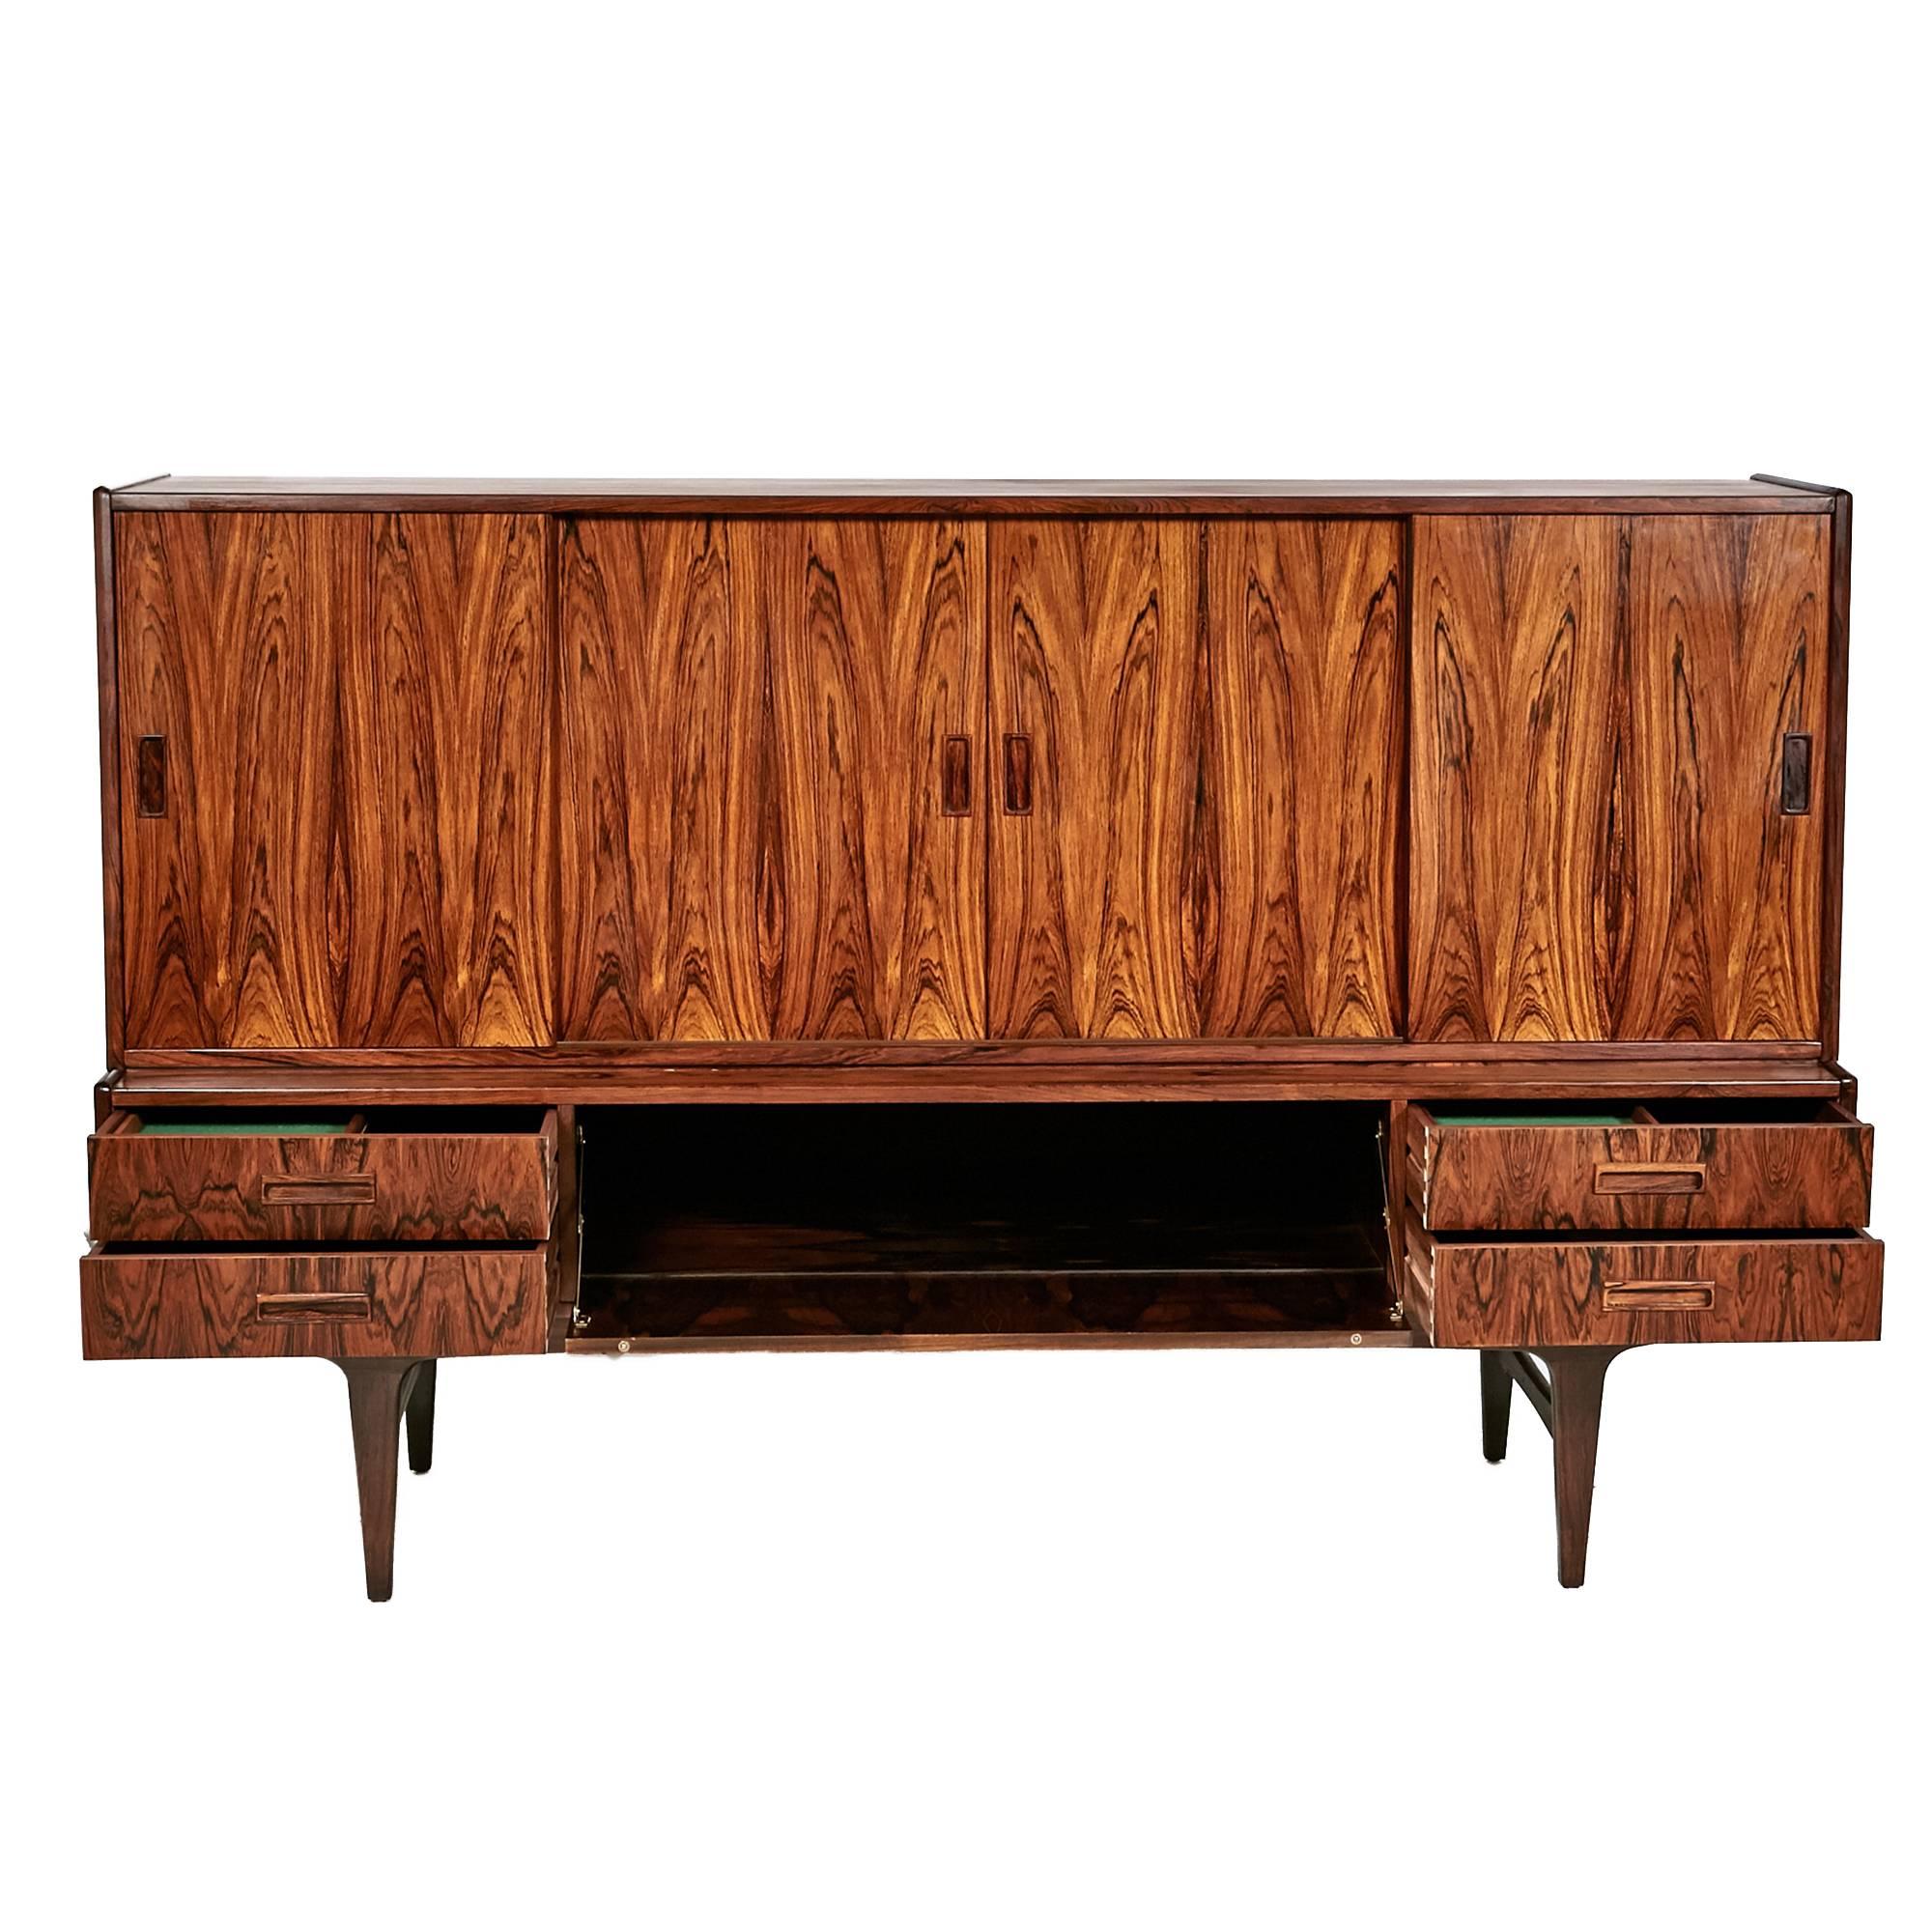 1960s Danish Rosewood Tall Credenza by Westergaard Mobelfabrik In Excellent Condition For Sale In Amherst, NH